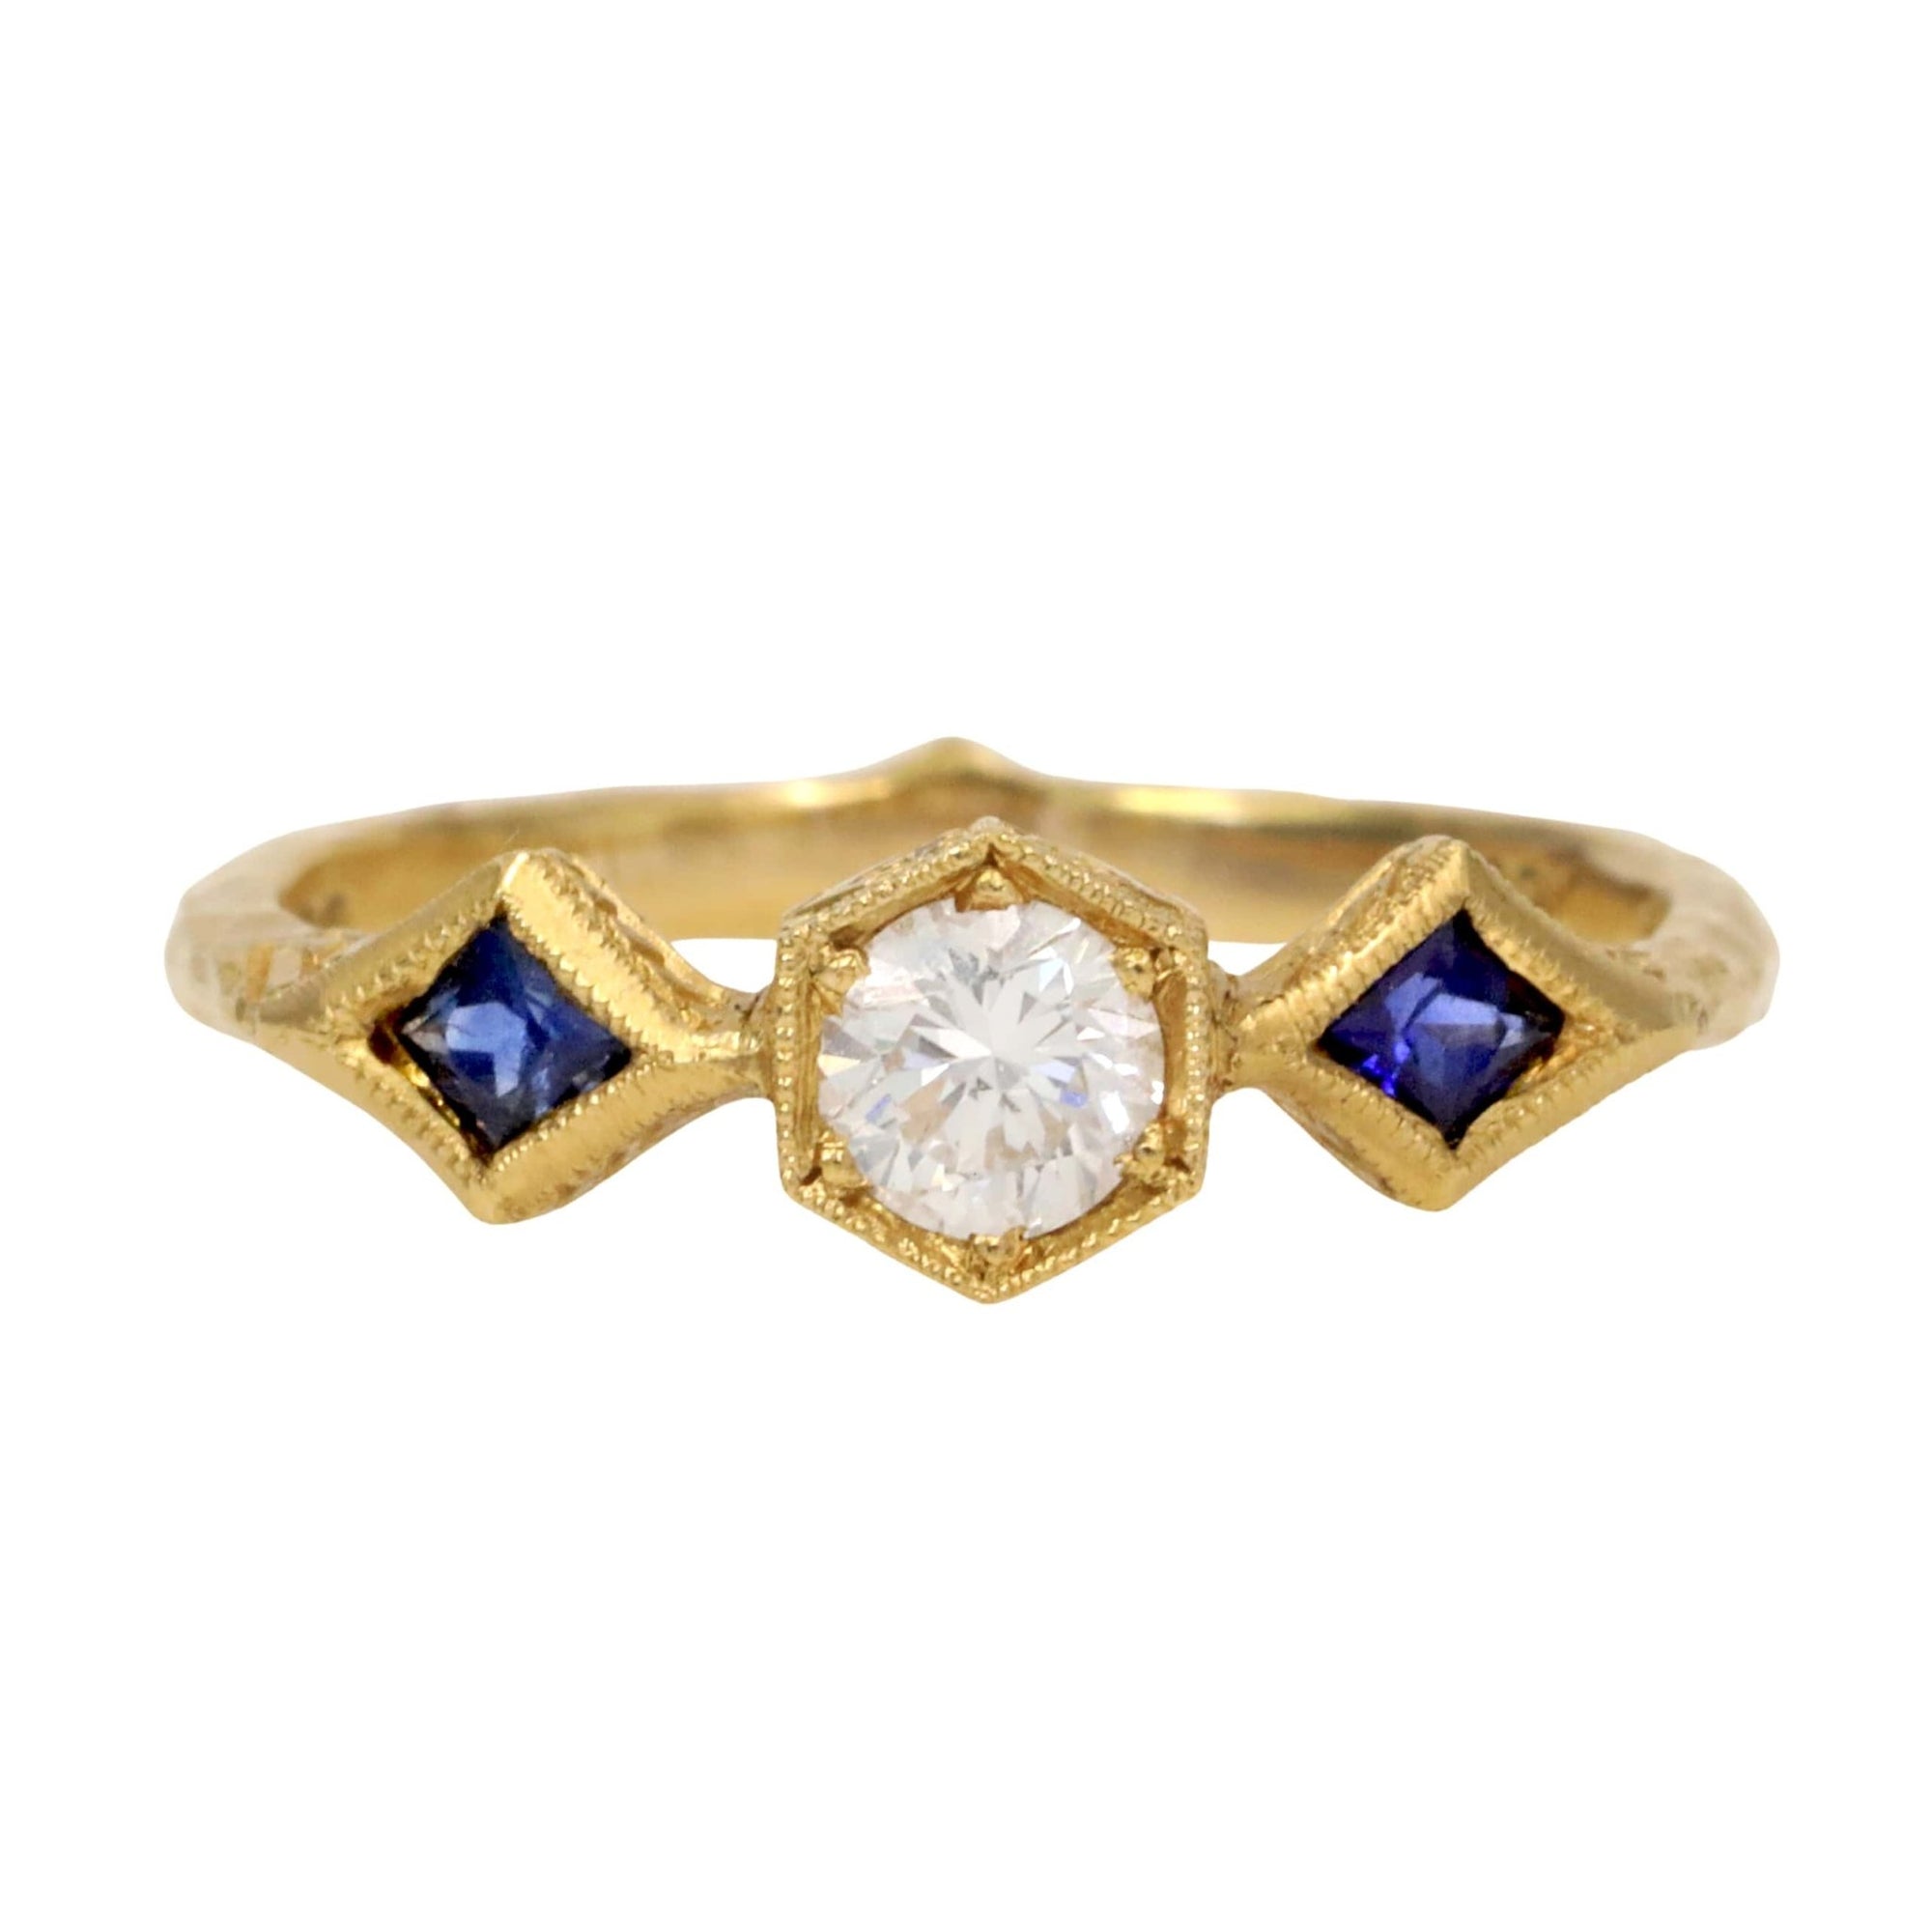 Cathy Waterman 22K Gold Diamond Ring with Blue Sapphires